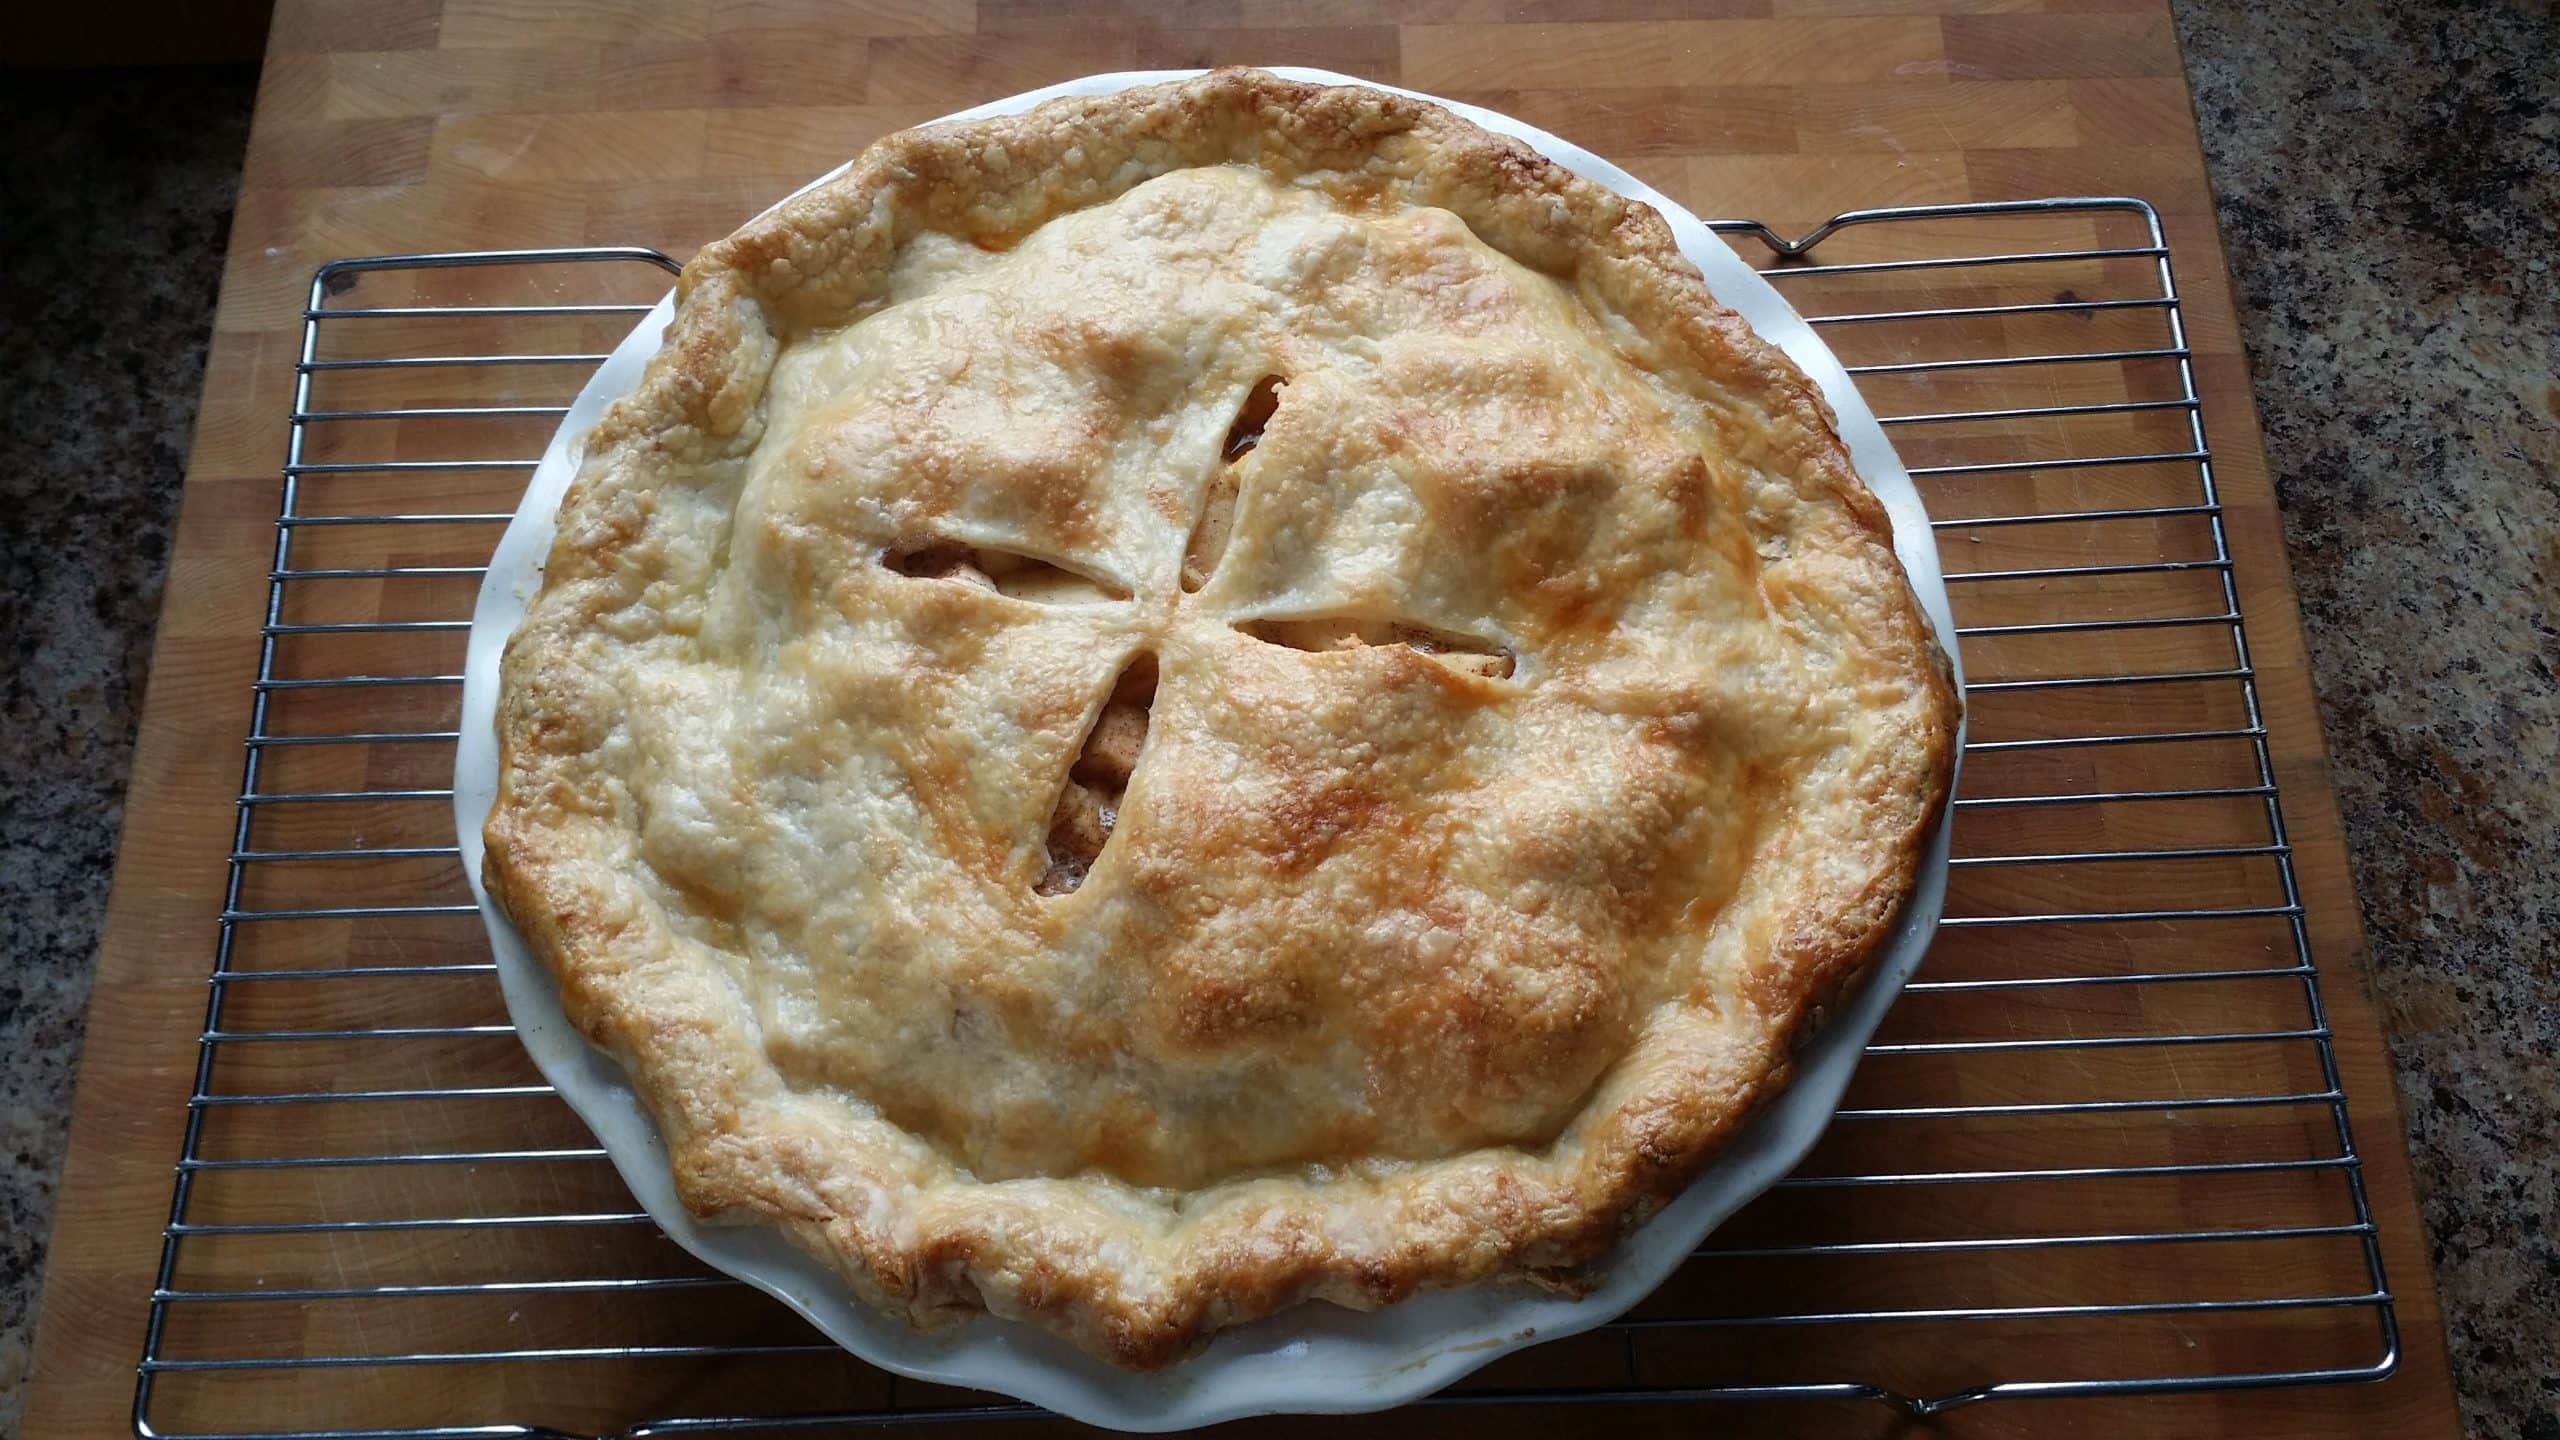 A pie cooling on a wired rack.